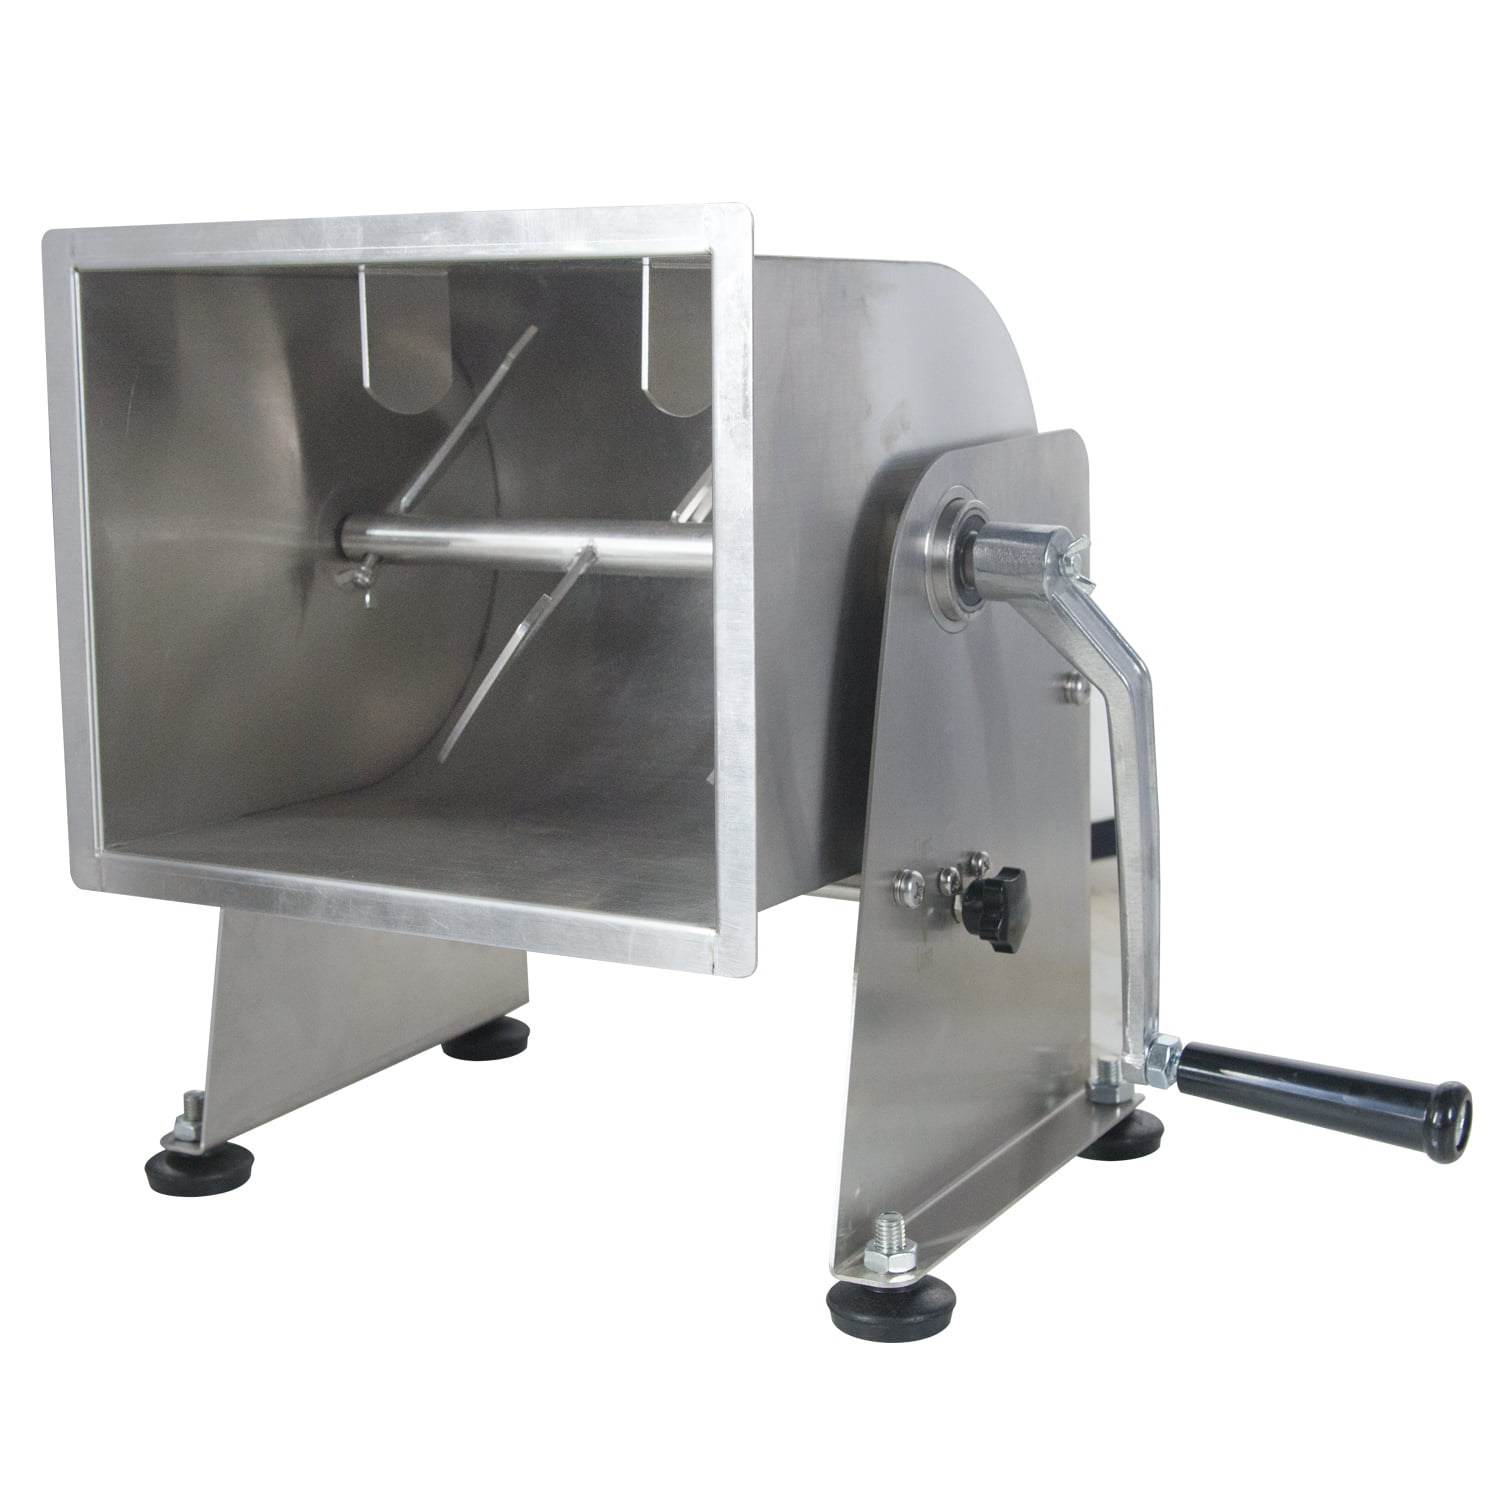 HAKKA 20 Pound Capacity Tank Stainless Steel Manual Meat Mixer (Mixing  Maximum 15-Pound for Meat), Silver 